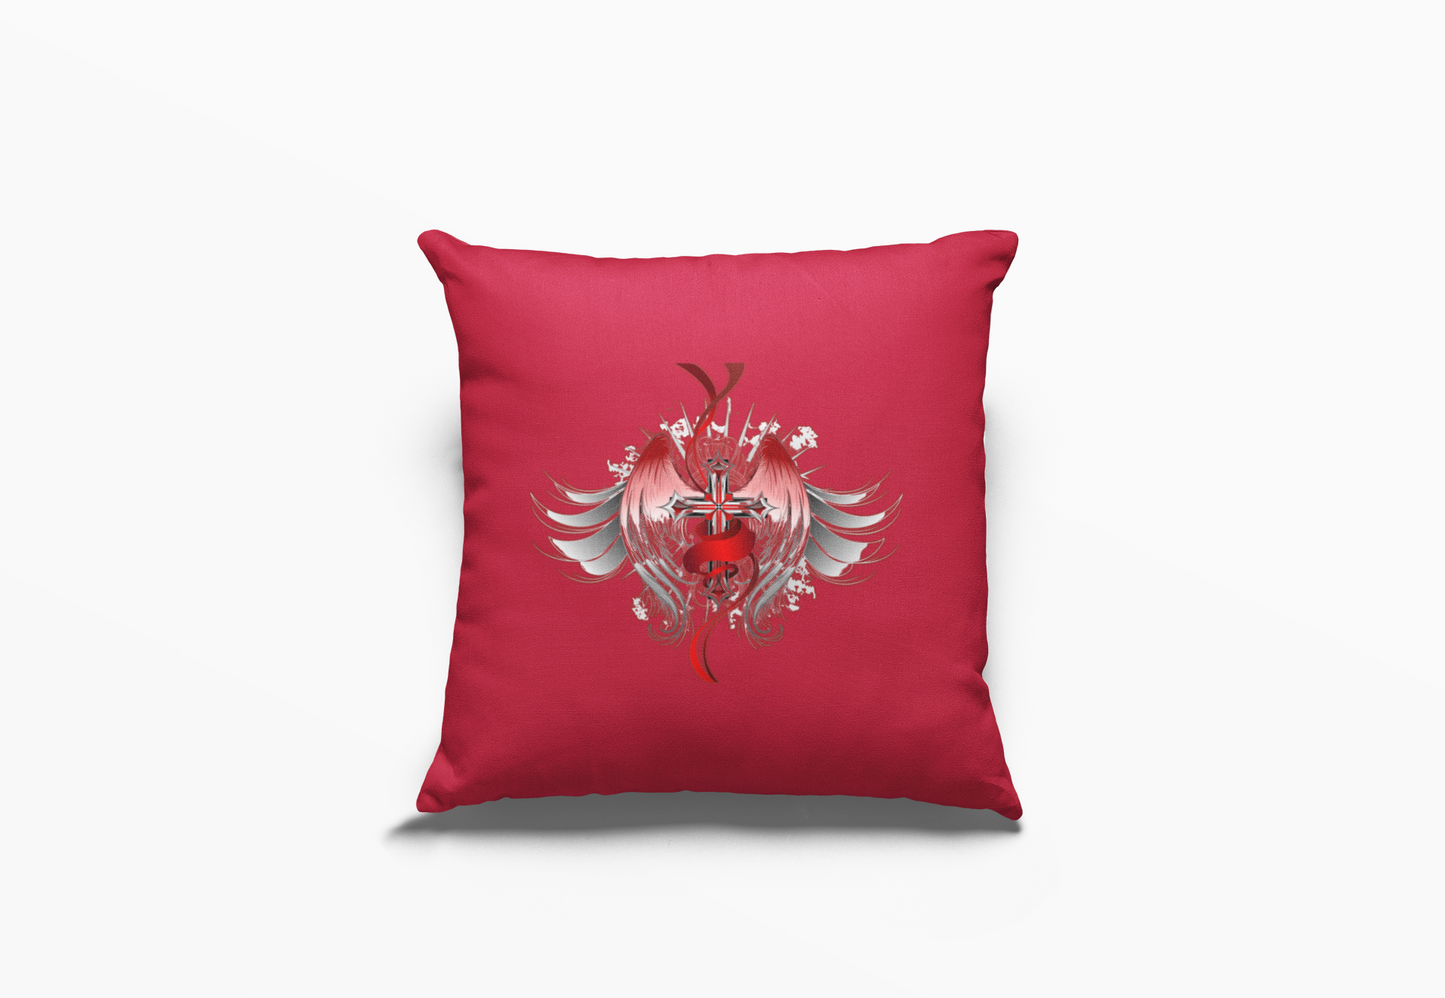 Cushion Cover - The Gothic Way